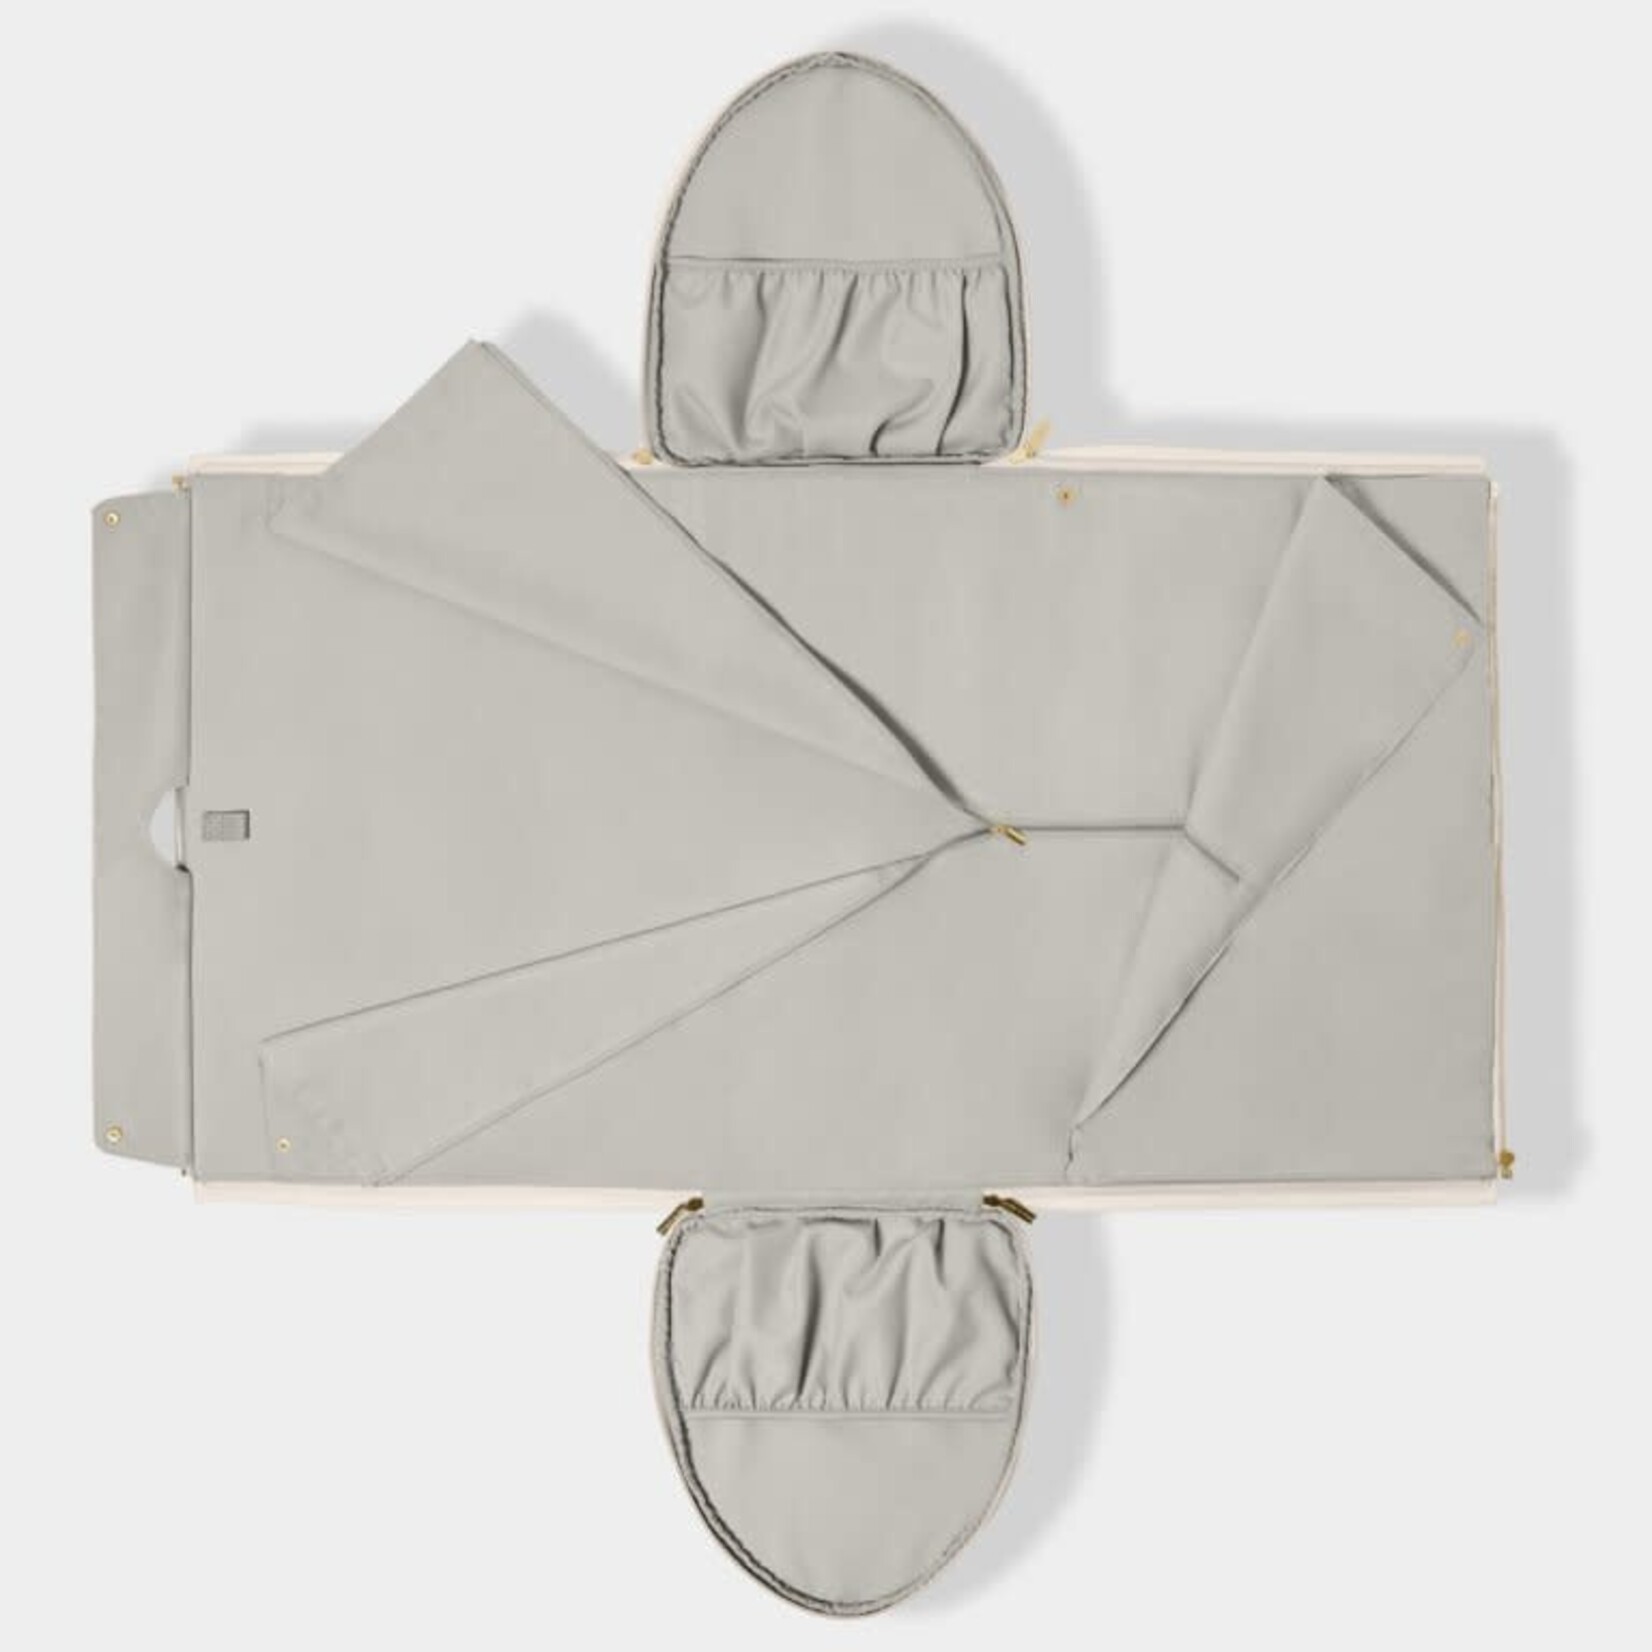 KATIE LOXTON FOLD OUT GARMENT WEEKEND BAG - OFF WHITE